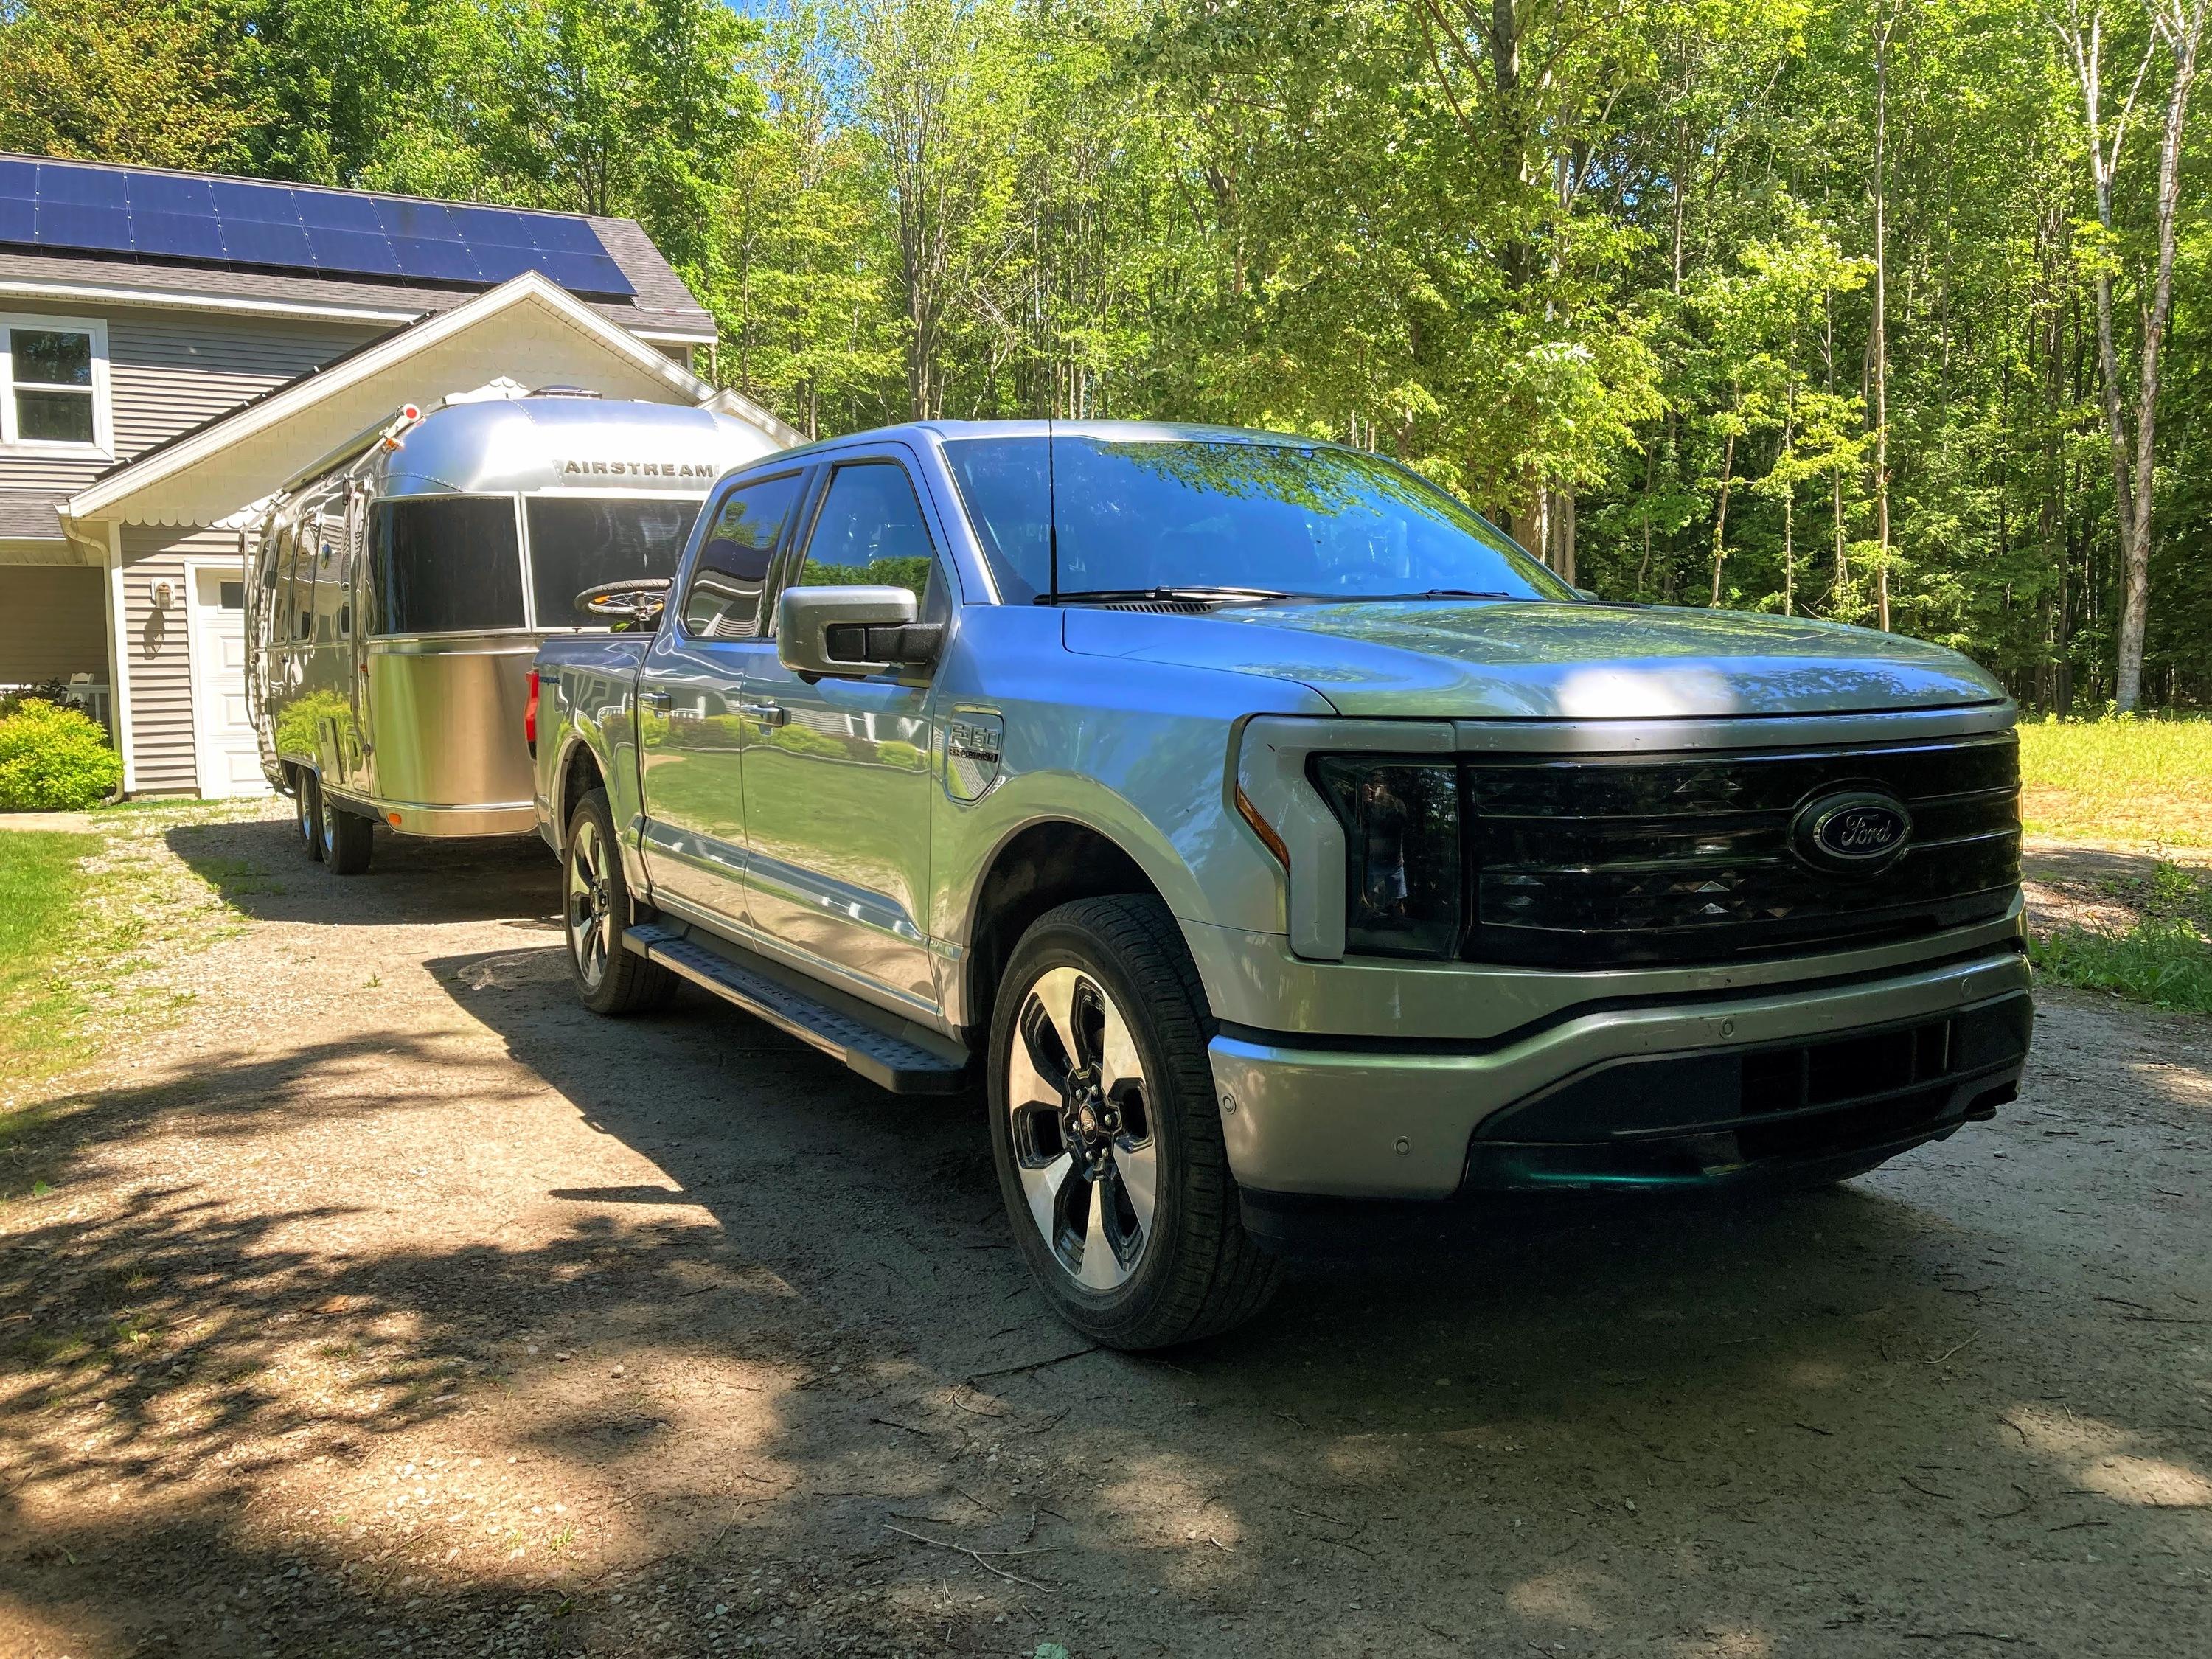 Ford F-150 Lightning 300 Mile Trip to Frankfort with the Lightning - Thoughts and Stats with the Airstream in tow f150-b11